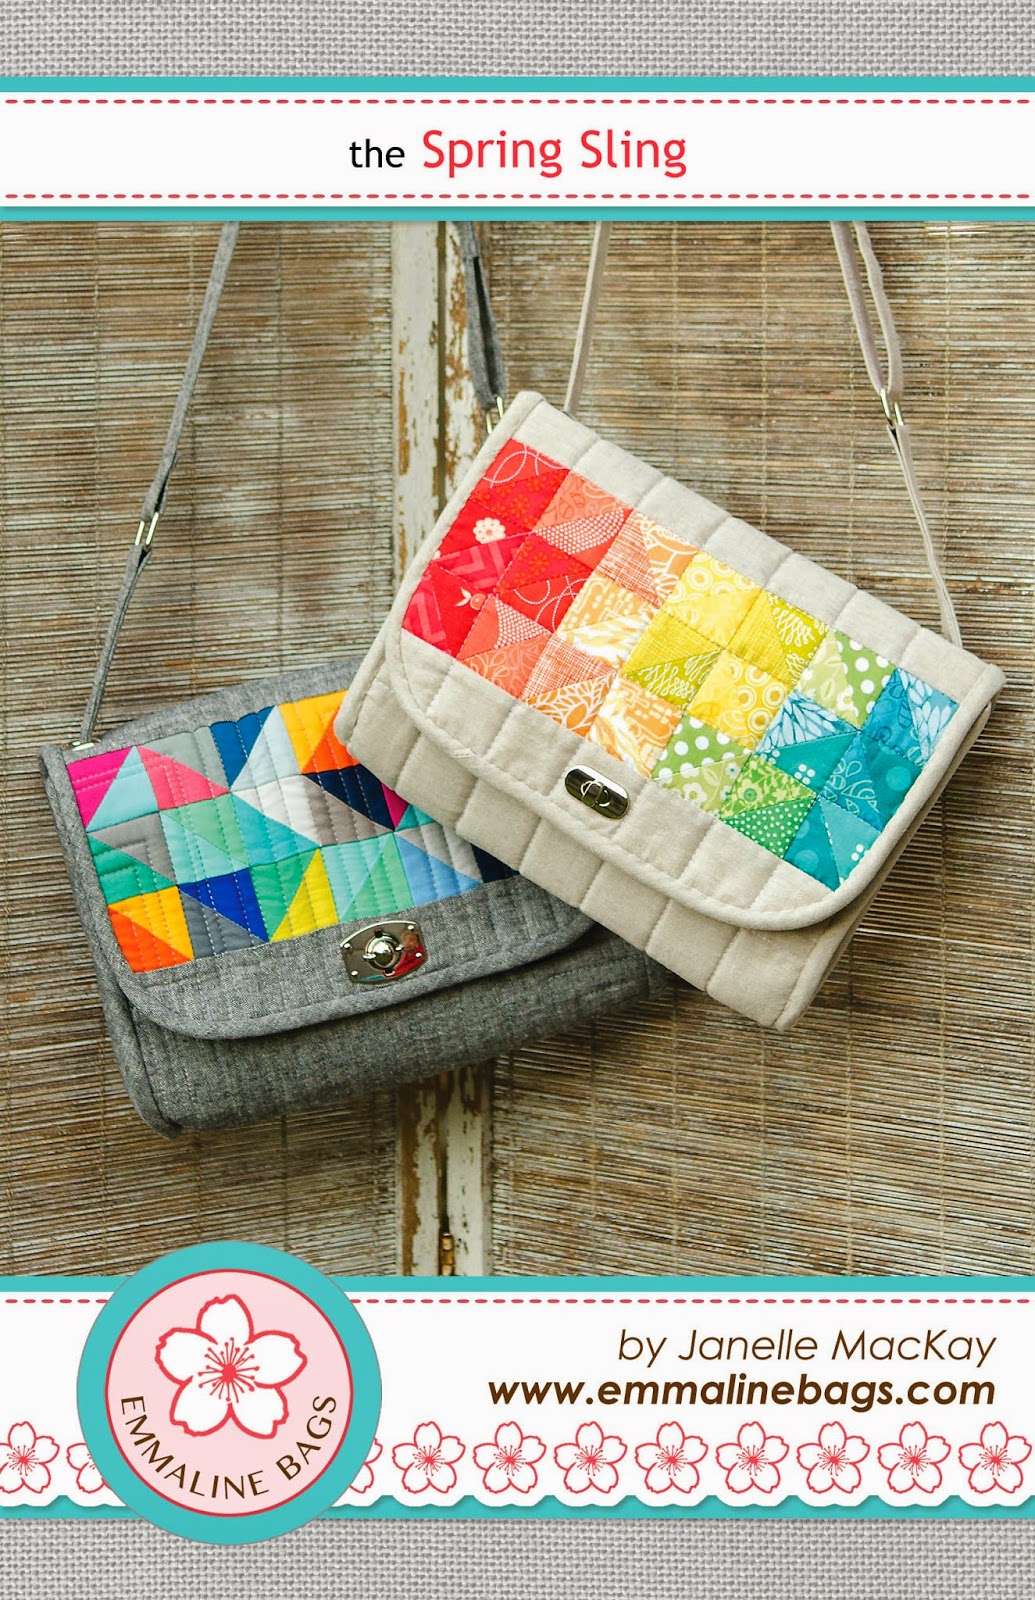 Emmaline Bags: Sewing Patterns and Purse Supplies: New Sewing Pattern - The Spring Sling is Here!